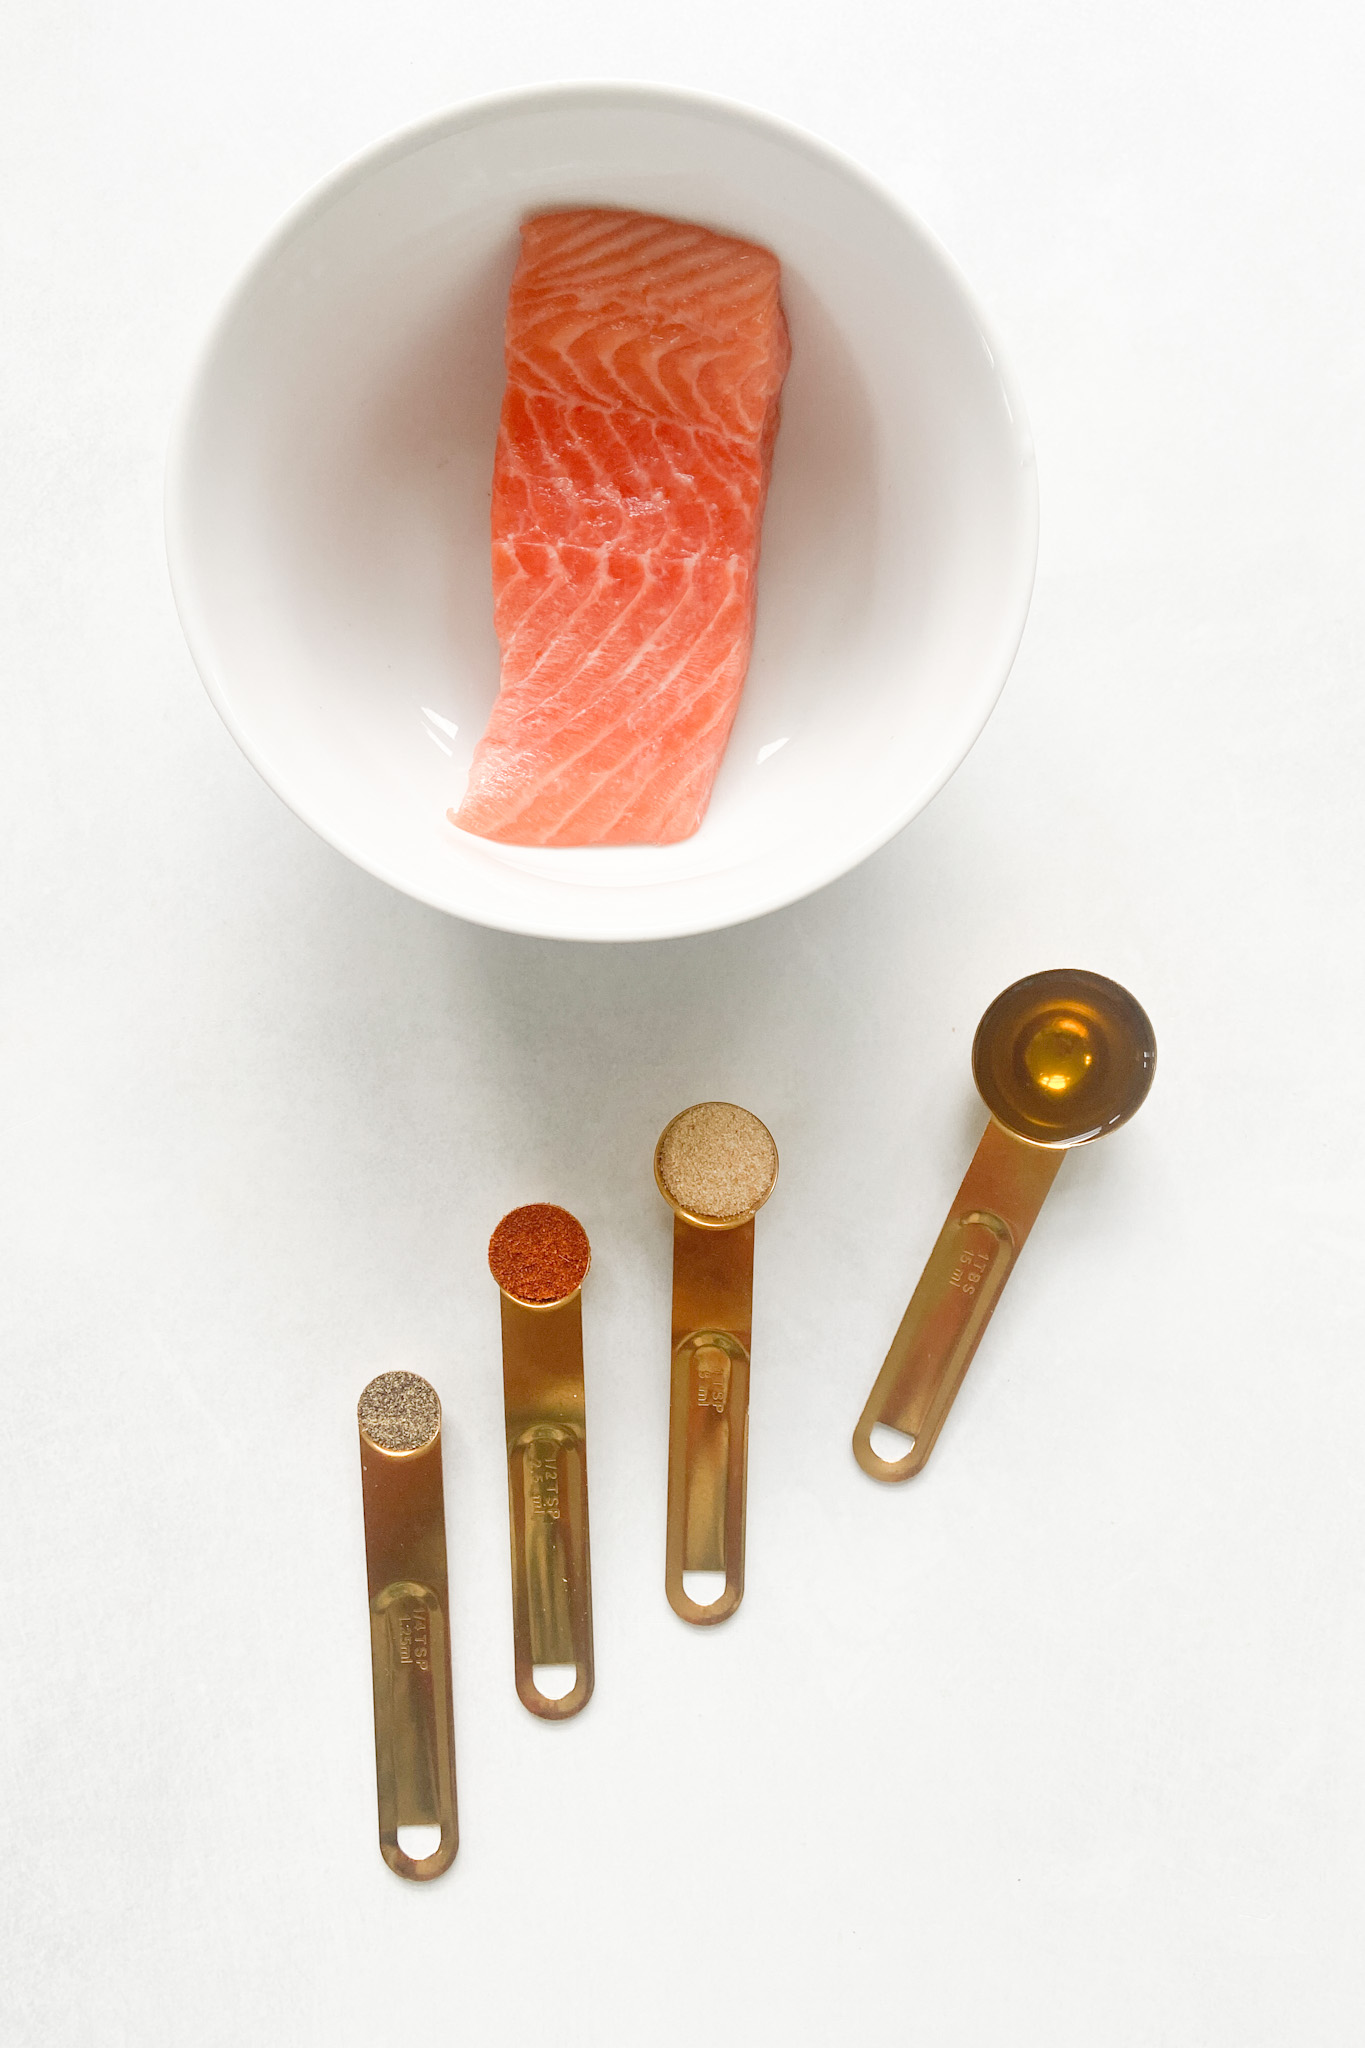 Ingredients to make air fryer salmon. See recipe card for detailed ingredient quantities.